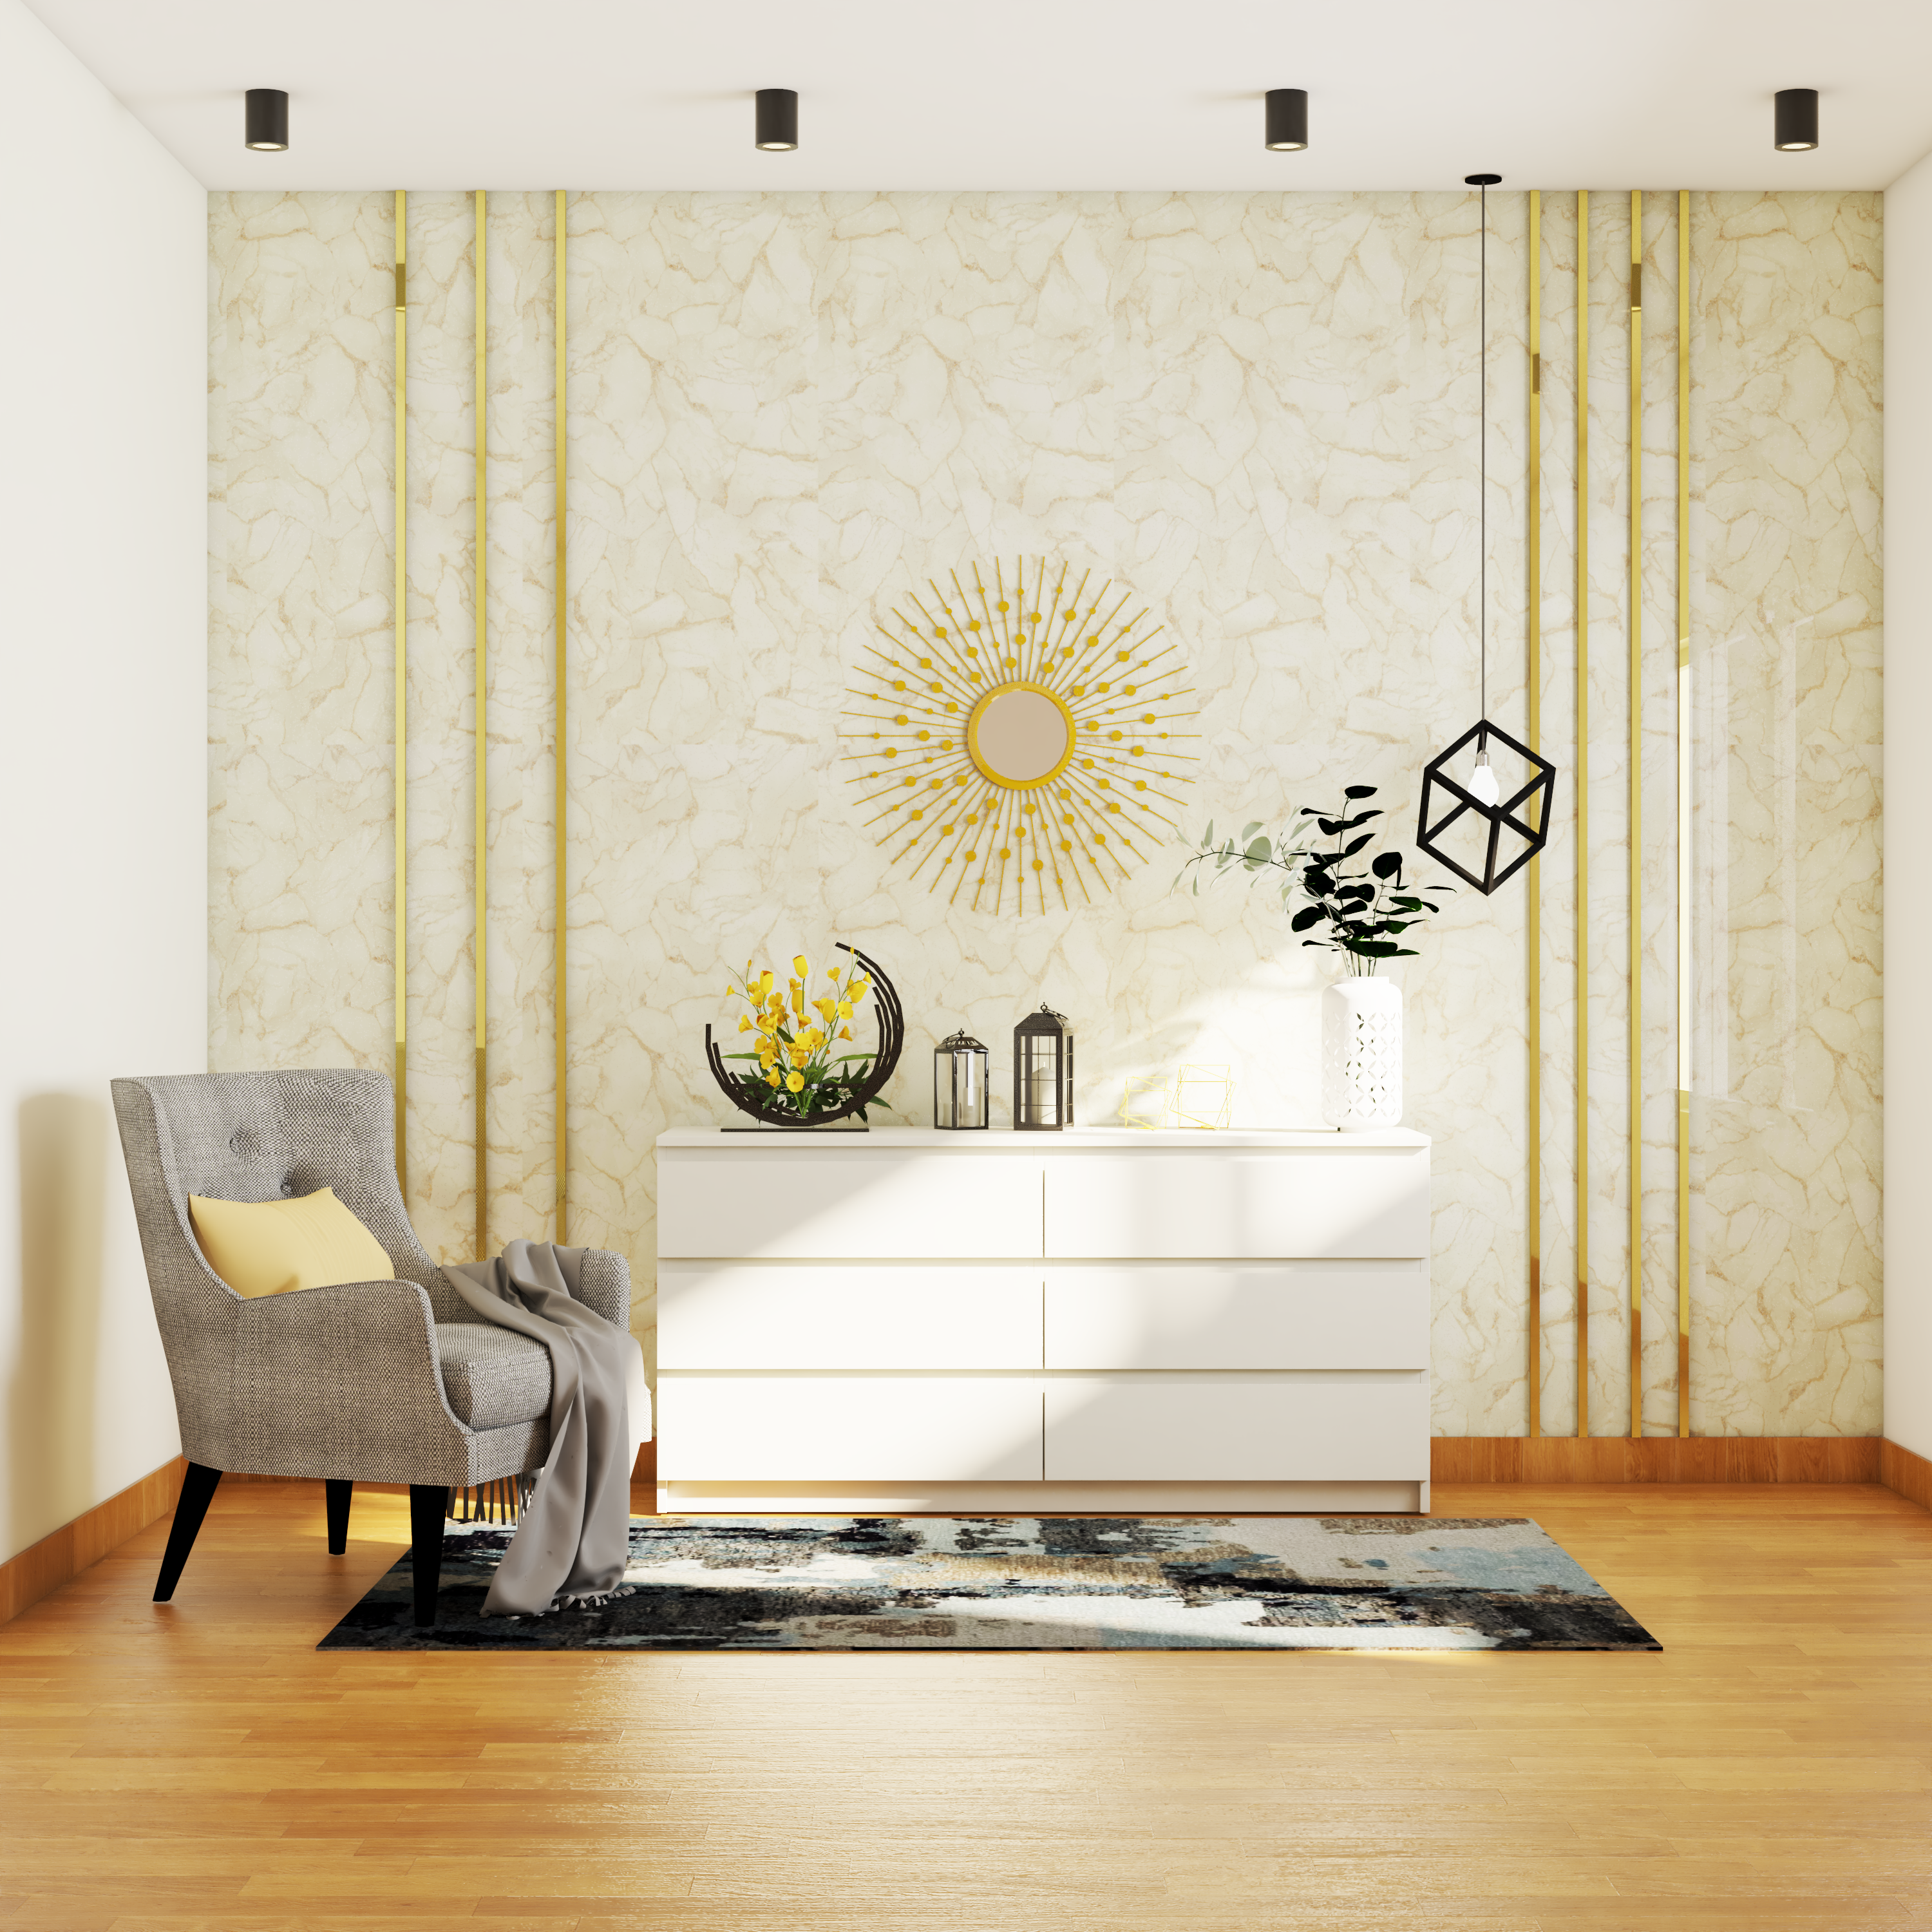 Buy Multicolour Vinyl Paper 3D Gold Lattice Selfadhesive Wallpaper with  Wooden Texture Finish by PrintMySpace Online  Natural  Floral Wallpapers   Wallpapers  Furnishings  Pepperfry Product